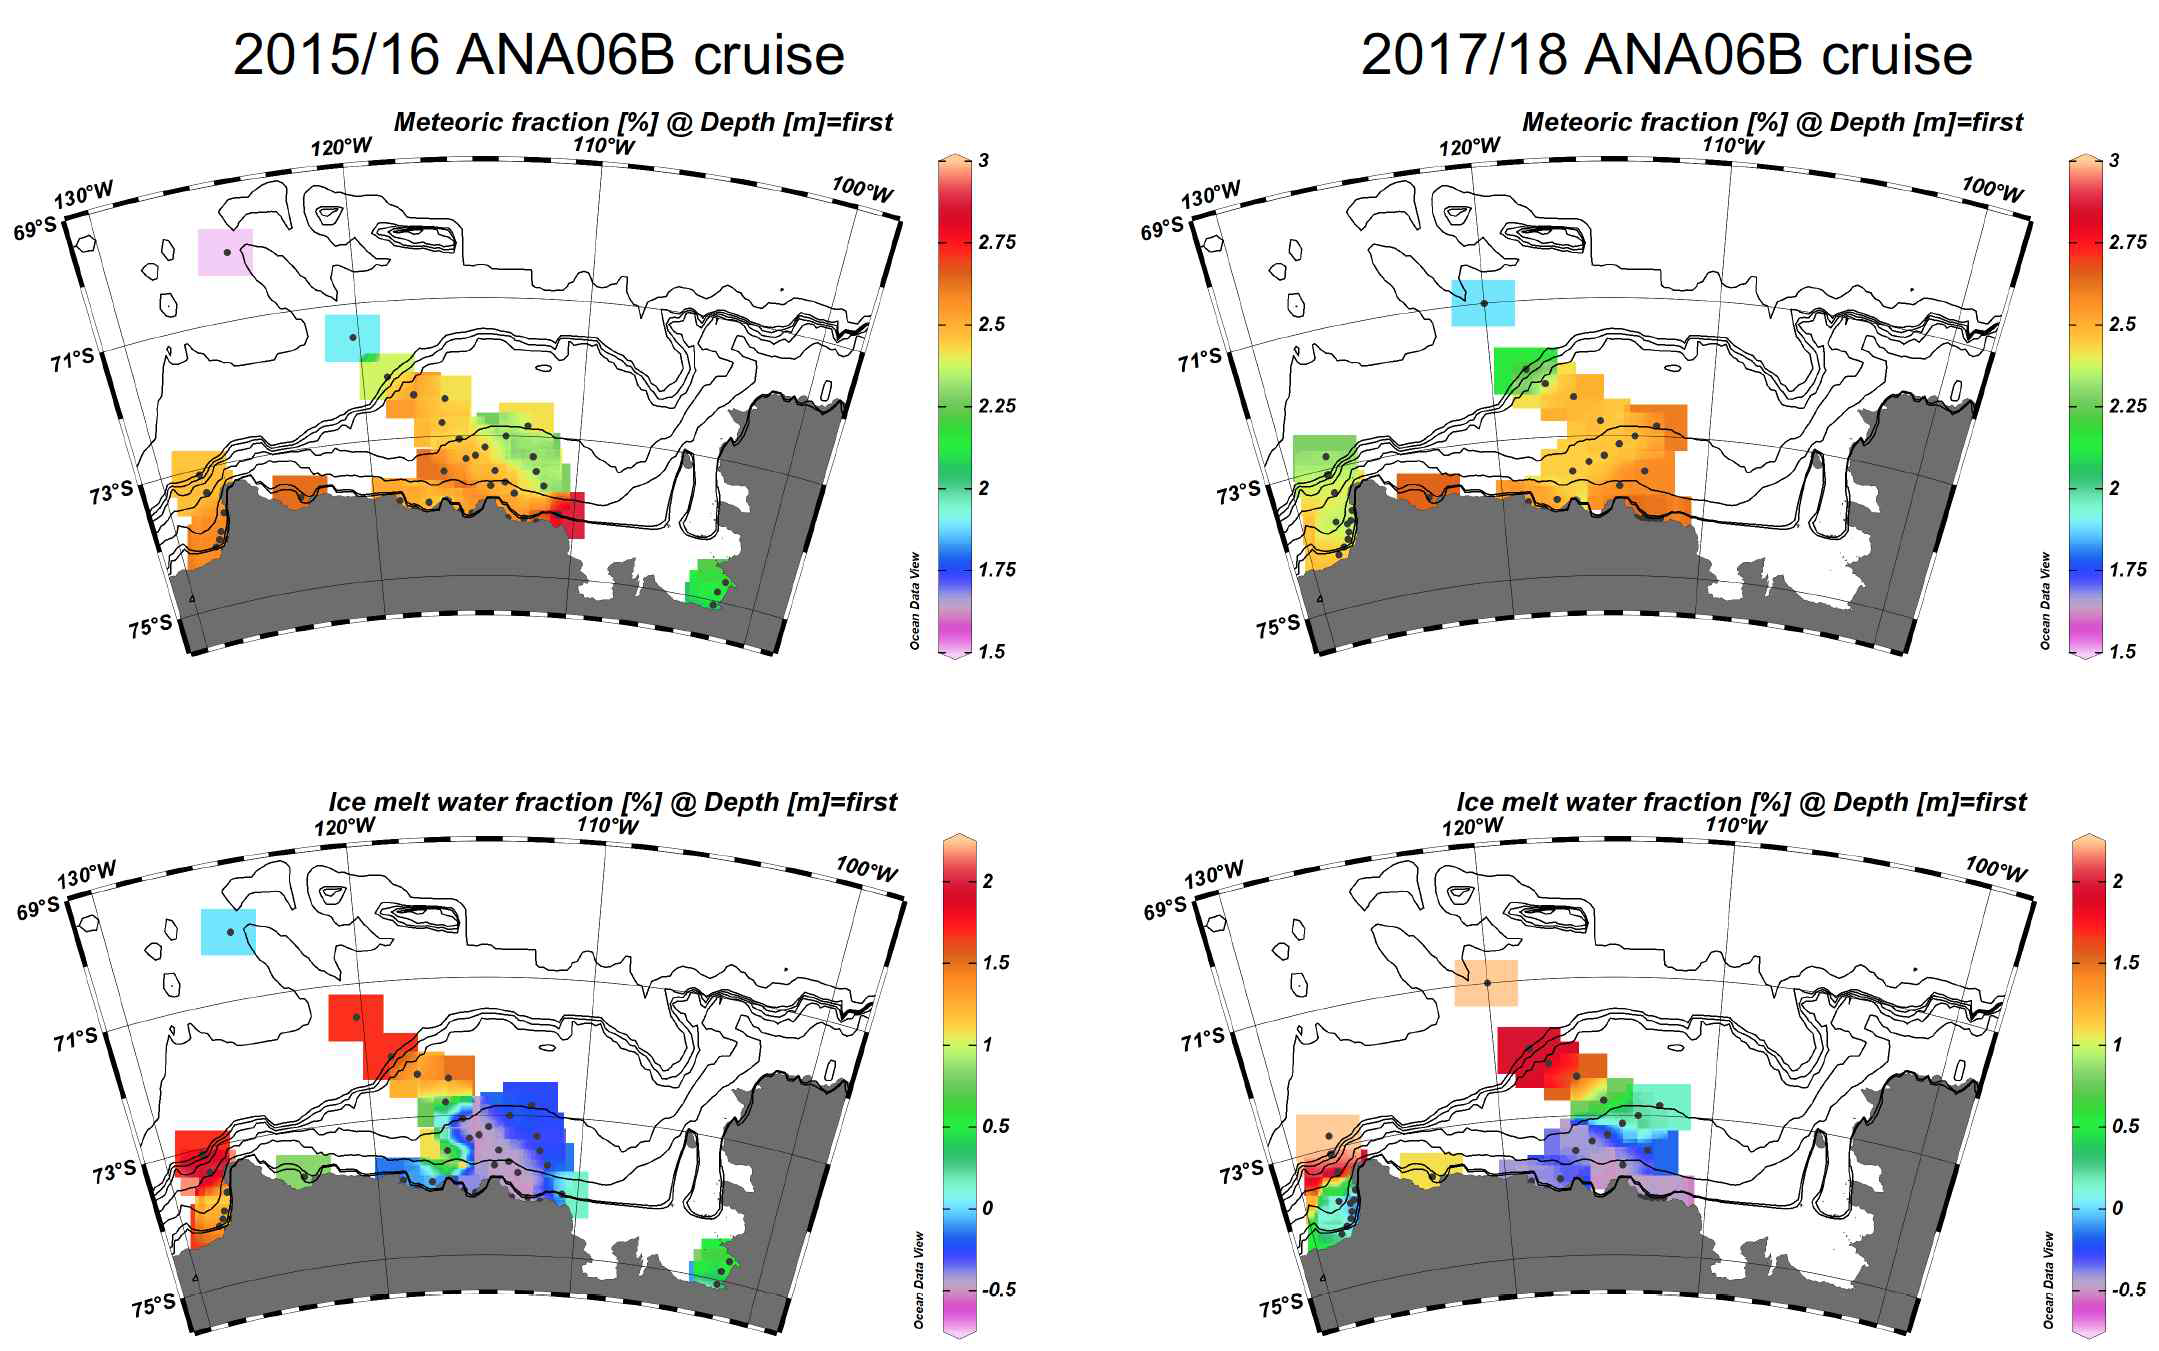 Spatial distributions of meteoric water and sea ice melt water fractions observed during the 2015/16 ANA06B and 2017/18 ANA08B cruises